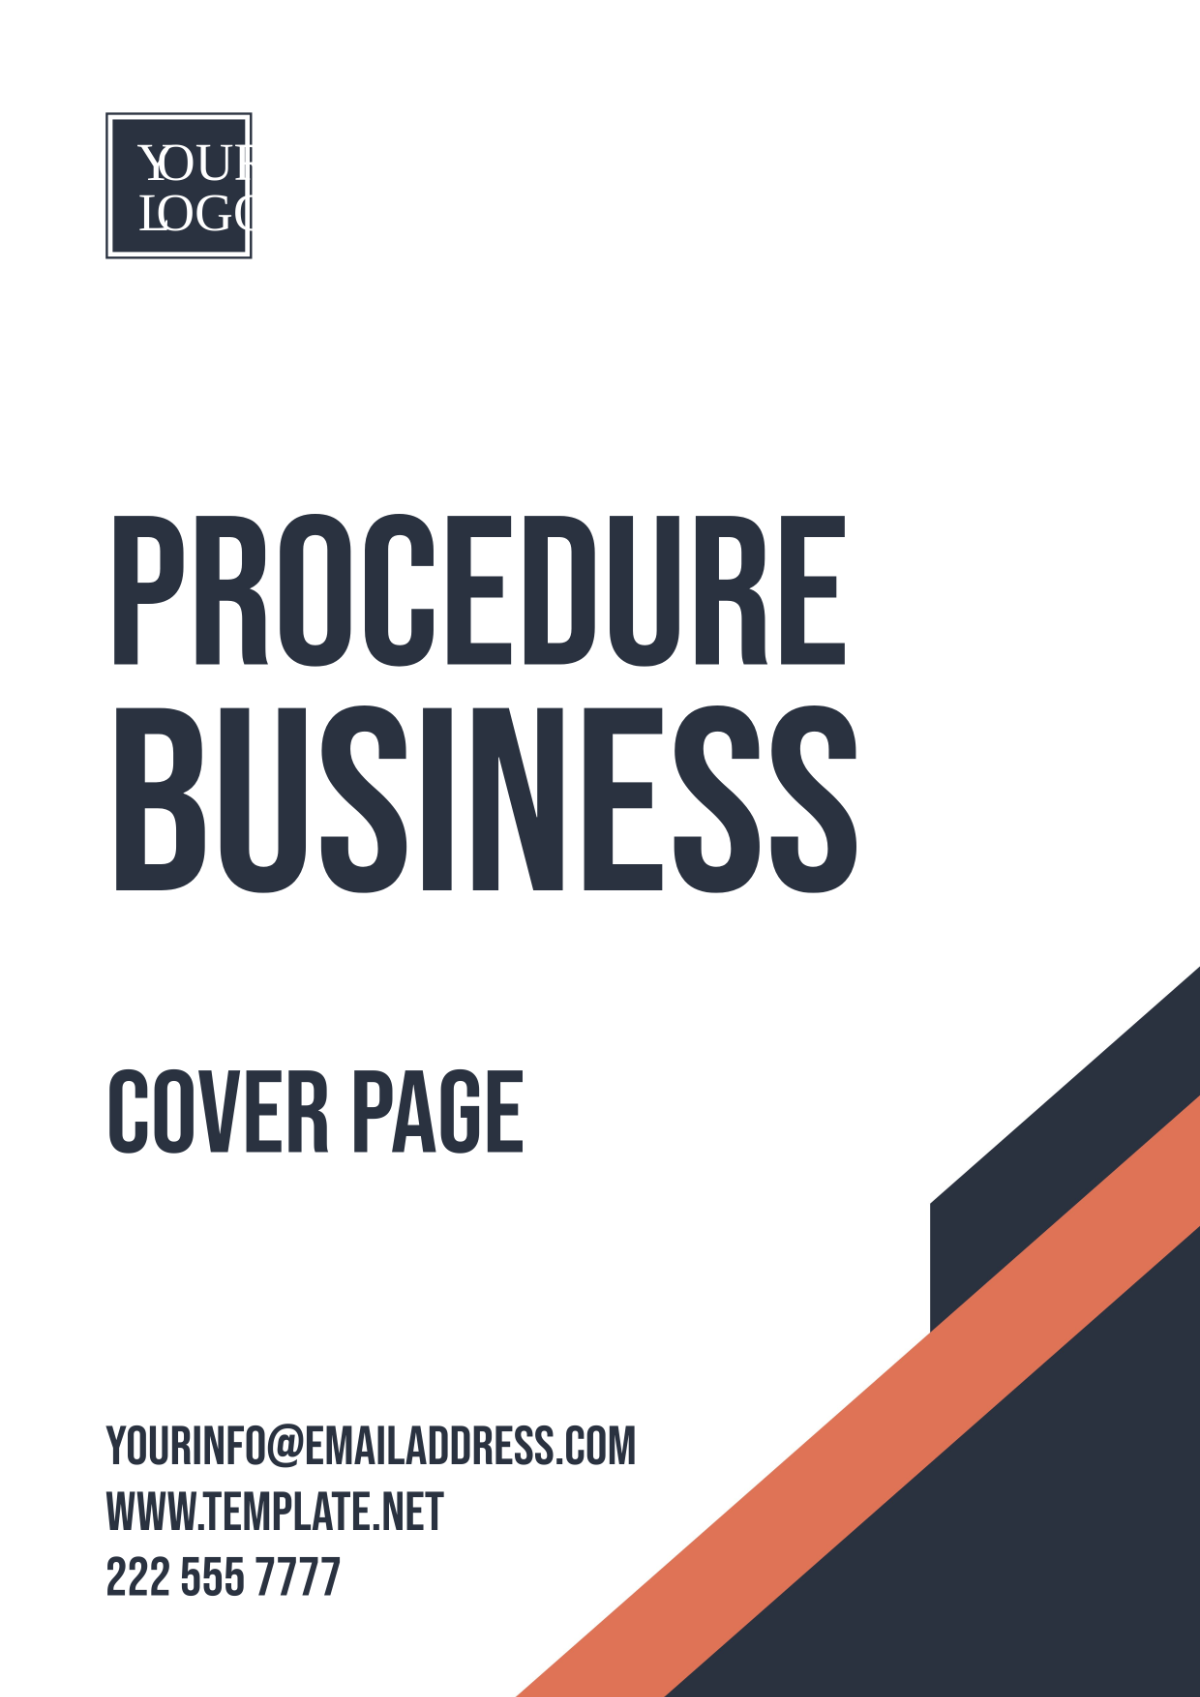 Procedure Business Cover Page